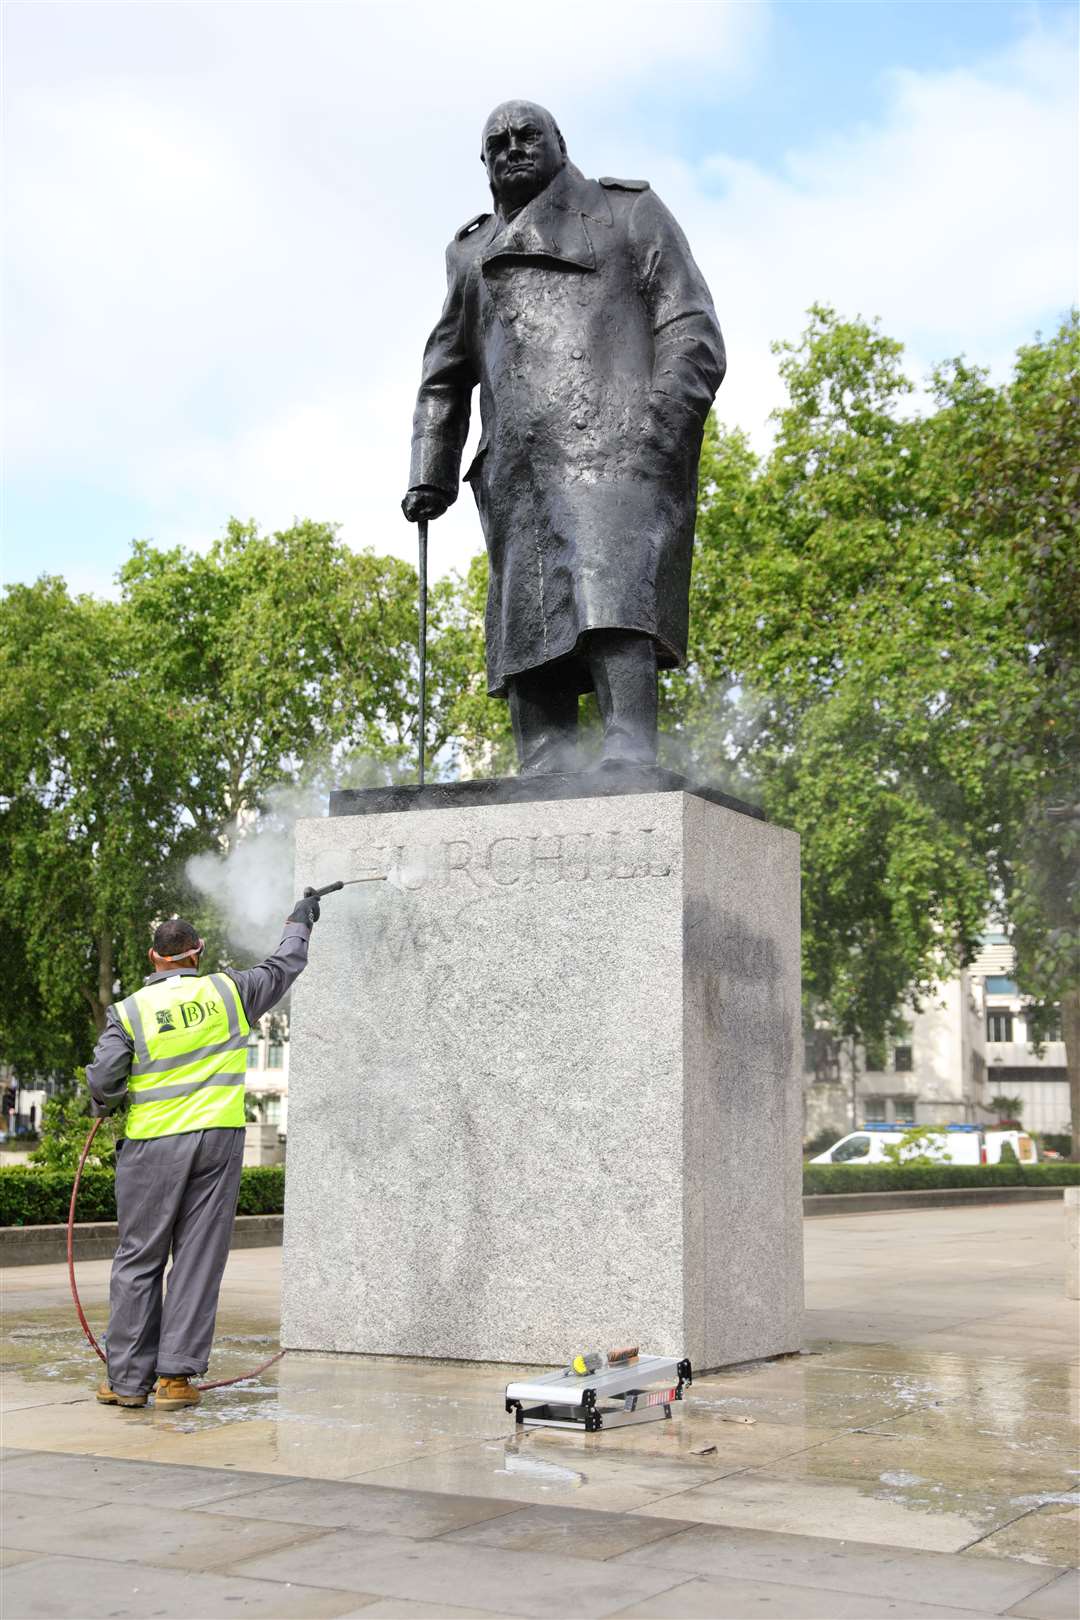 A worker cleans graffiti from the plinth of the statue of Sir Winston Churchill at Parliament Square (PA)